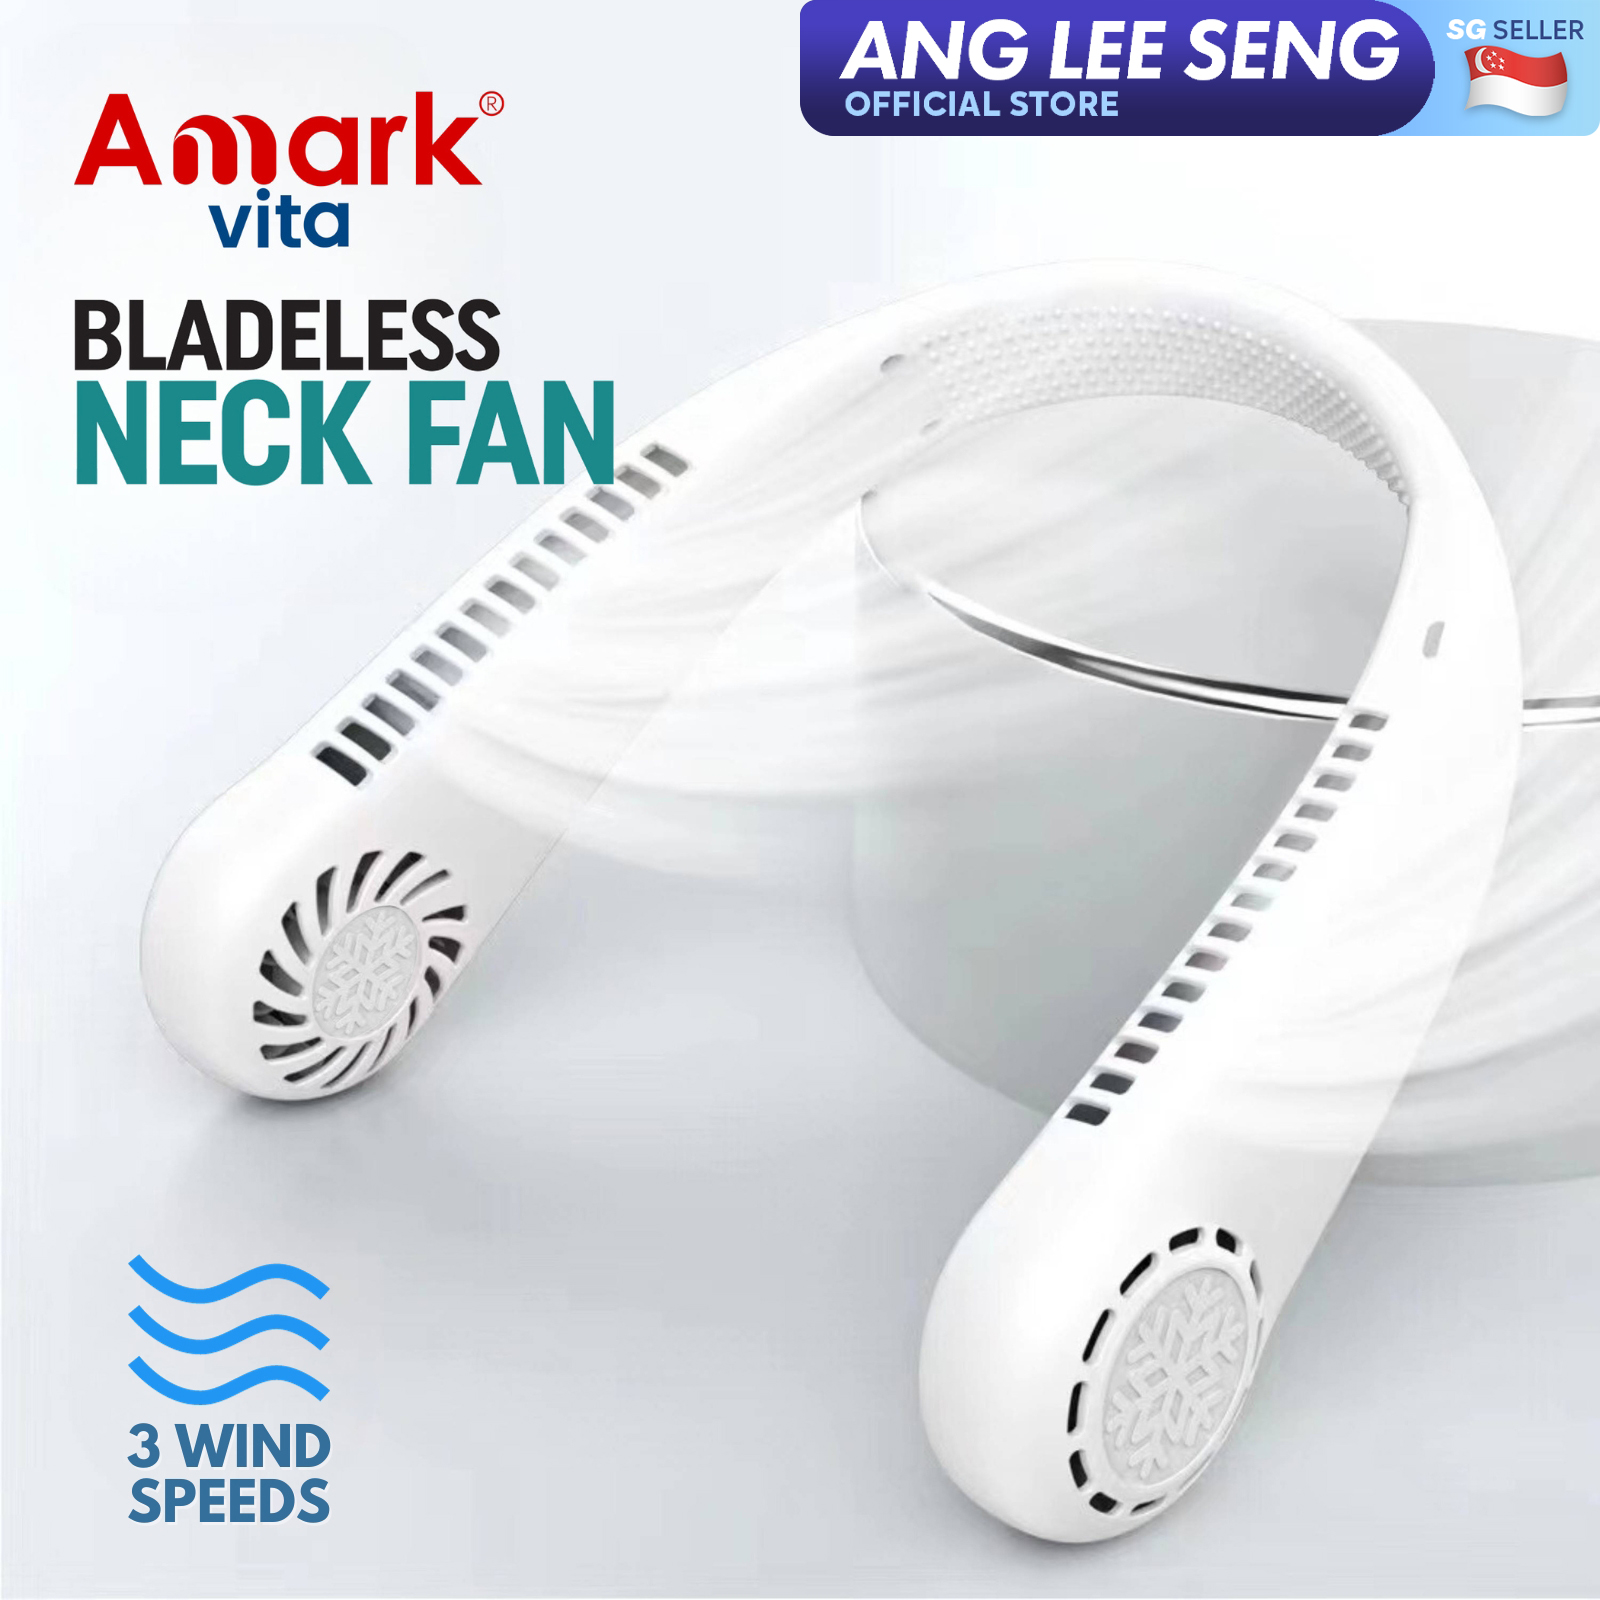 Amark Vita Bladeless Neck Fan - Hands-Free Cooling & USB-Rechargeable